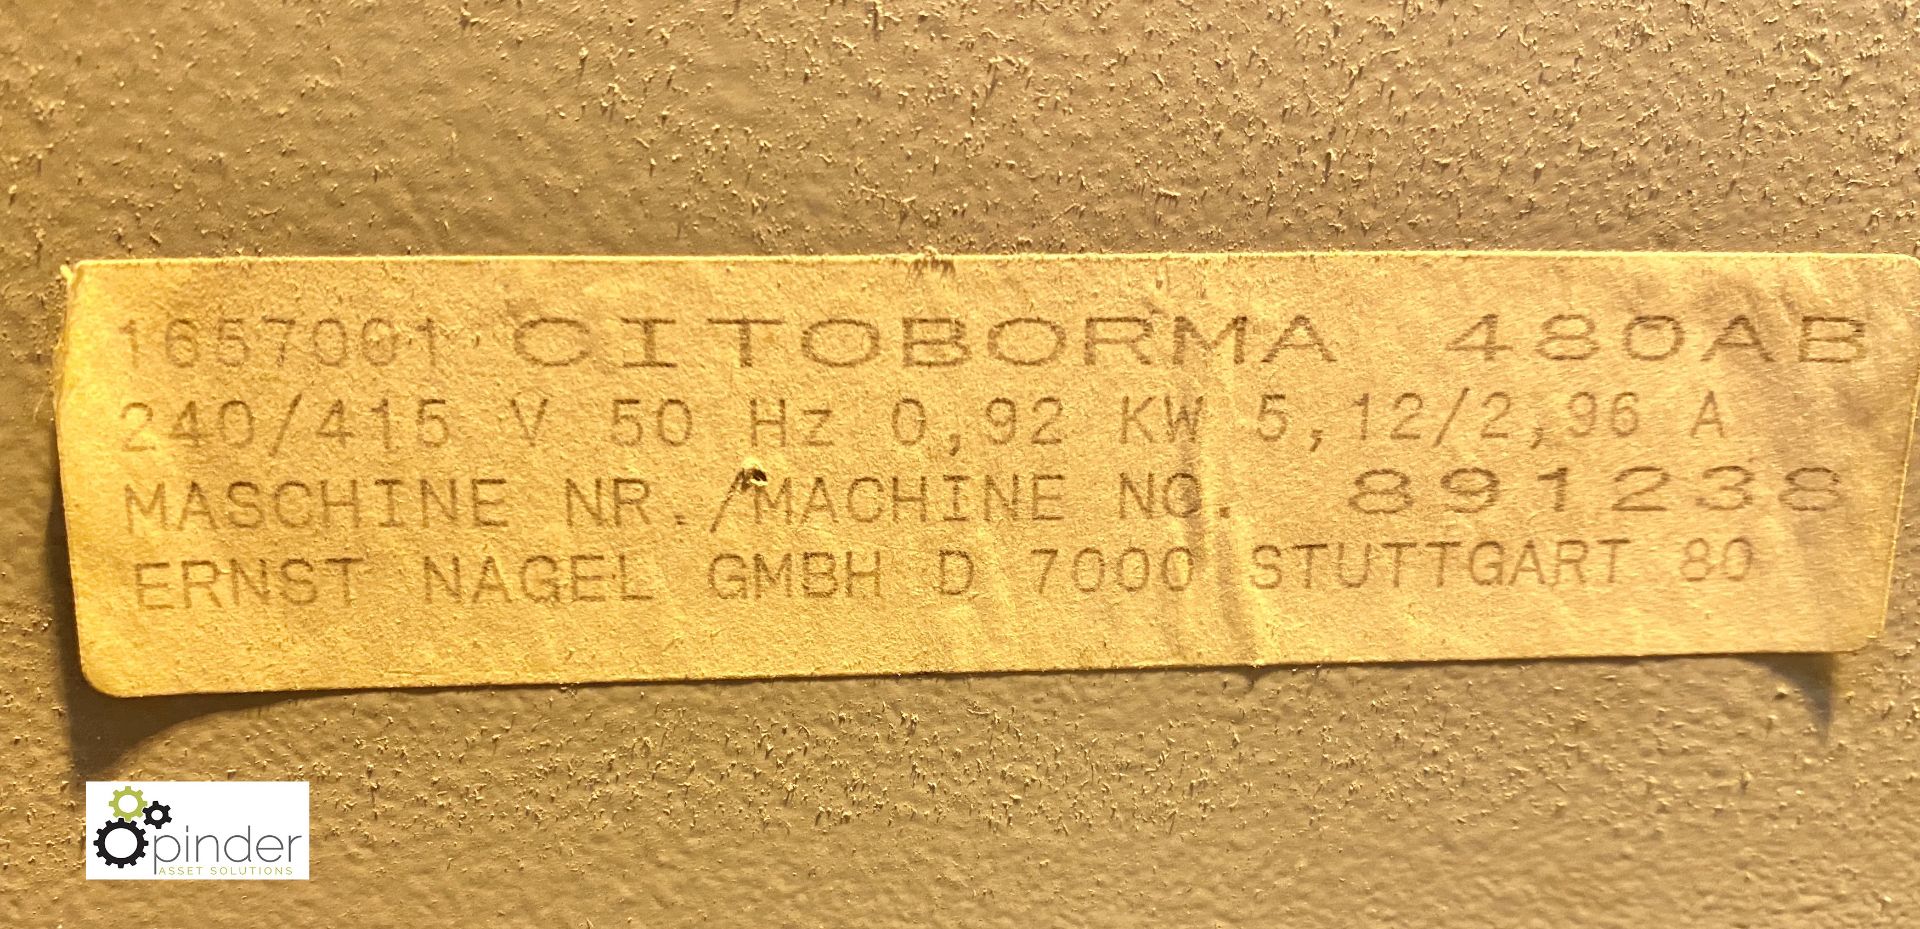 Citoborma 480AB 4-spindle Paper Drill, serial number 891238, 415volts (LIFT OUT FEE: £10 plus VAT on - Image 5 of 6